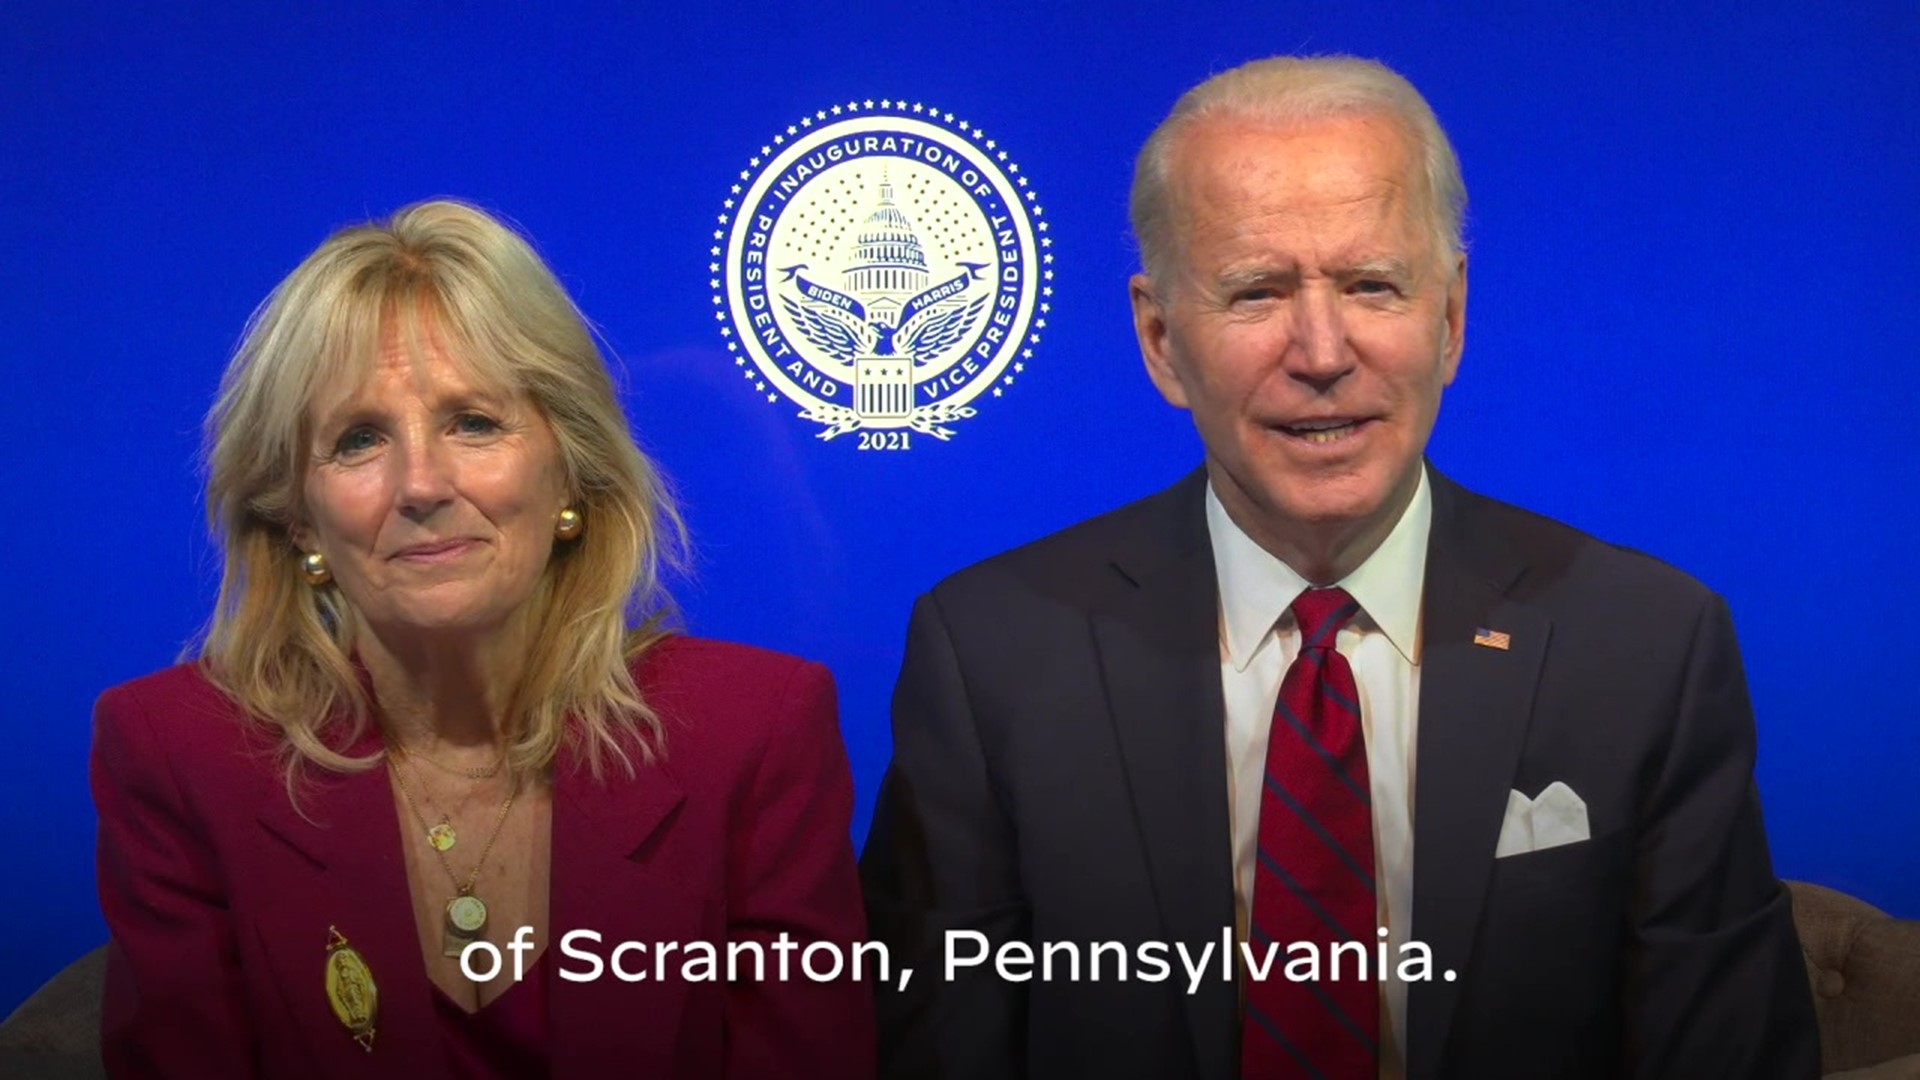 Joe Biden's inauguration as the 46th President of the United States carried a special significance in his birthplace of Scranton.